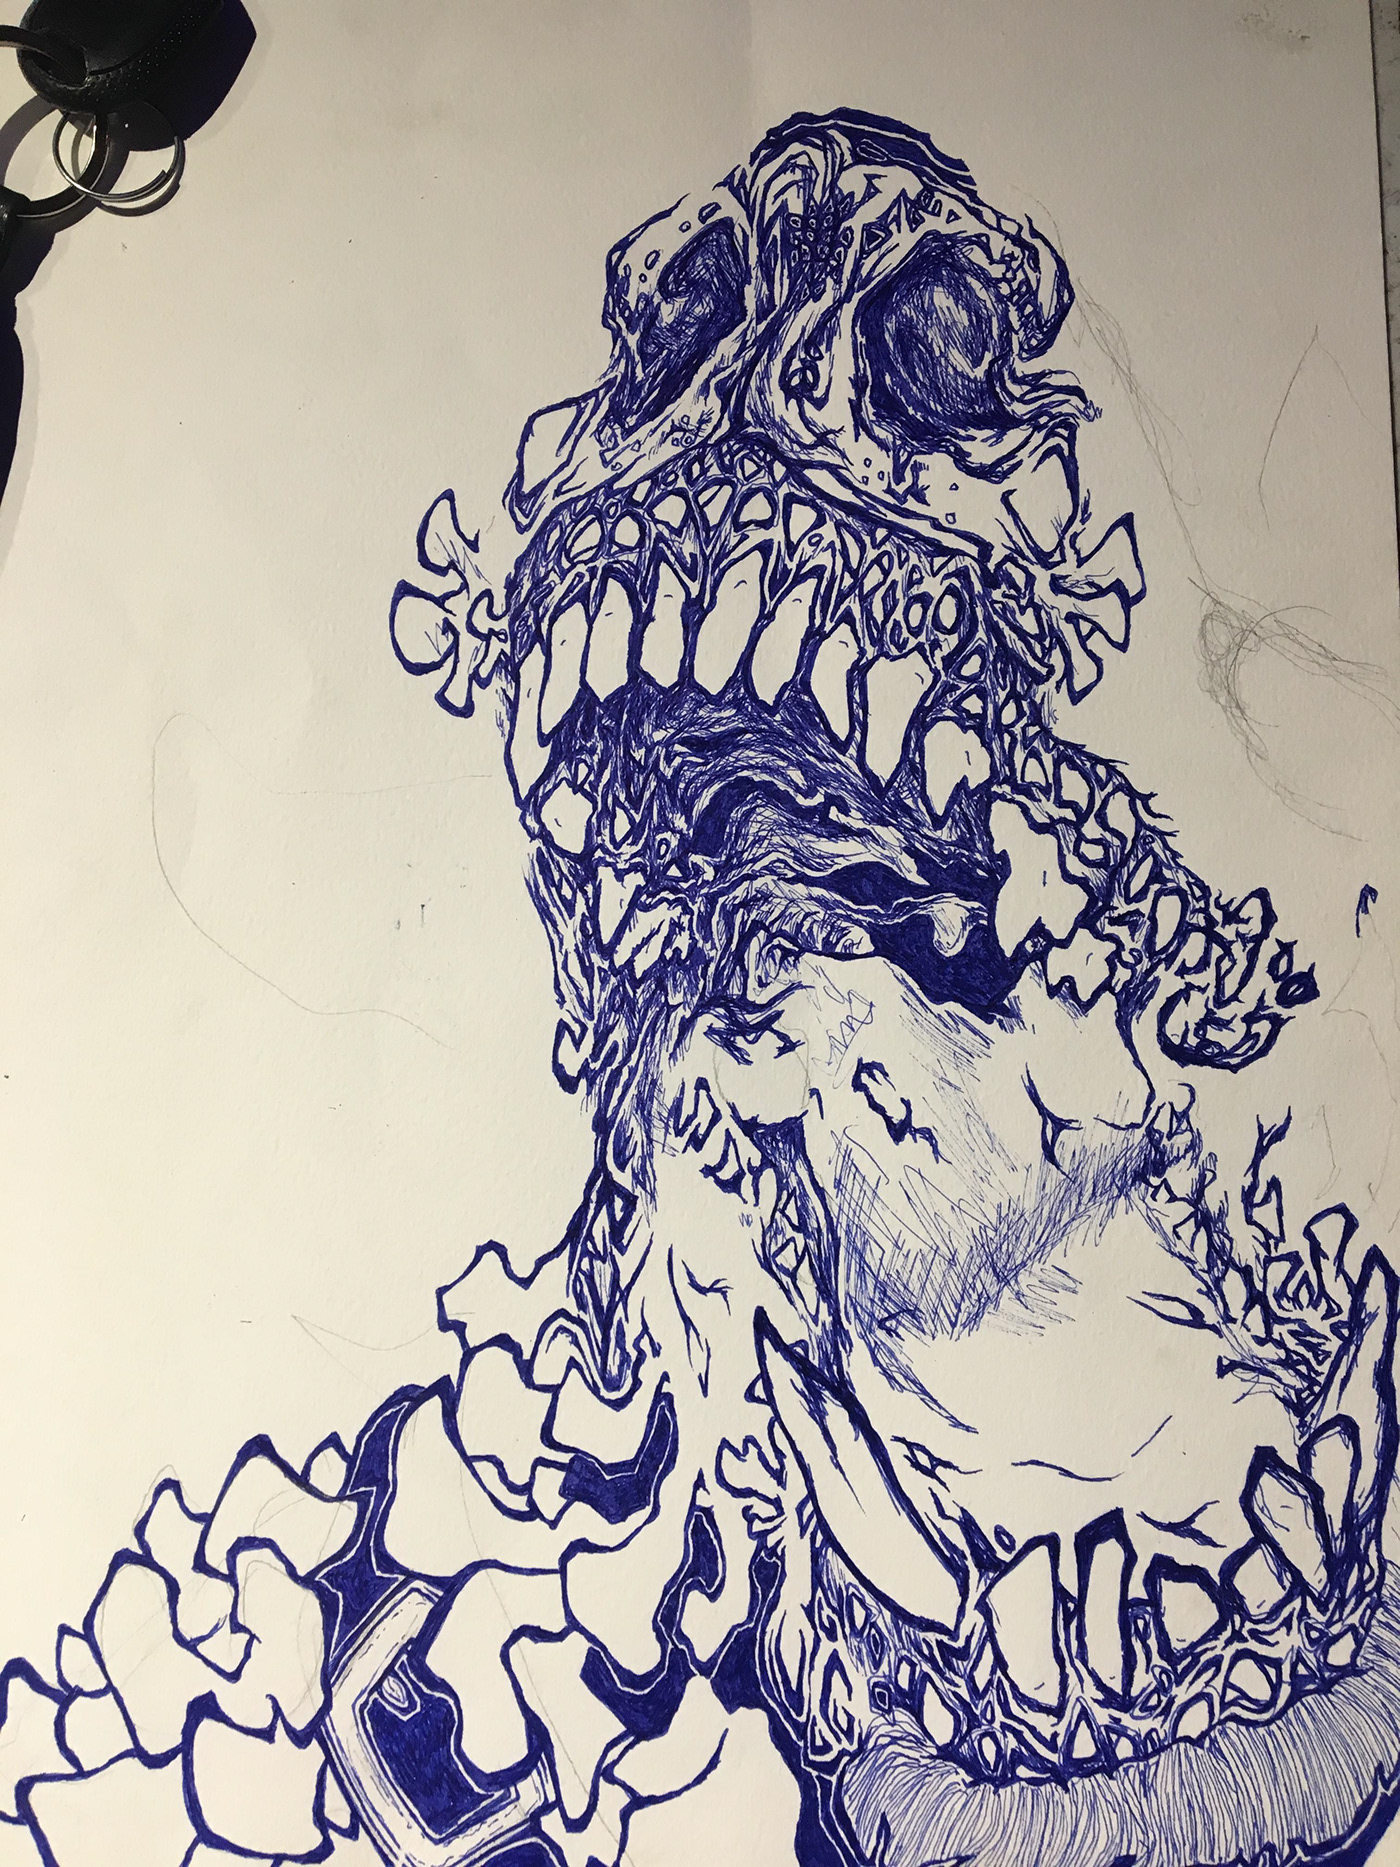 ink acrylic teeth extreme perspective bright colors linework detail surreal